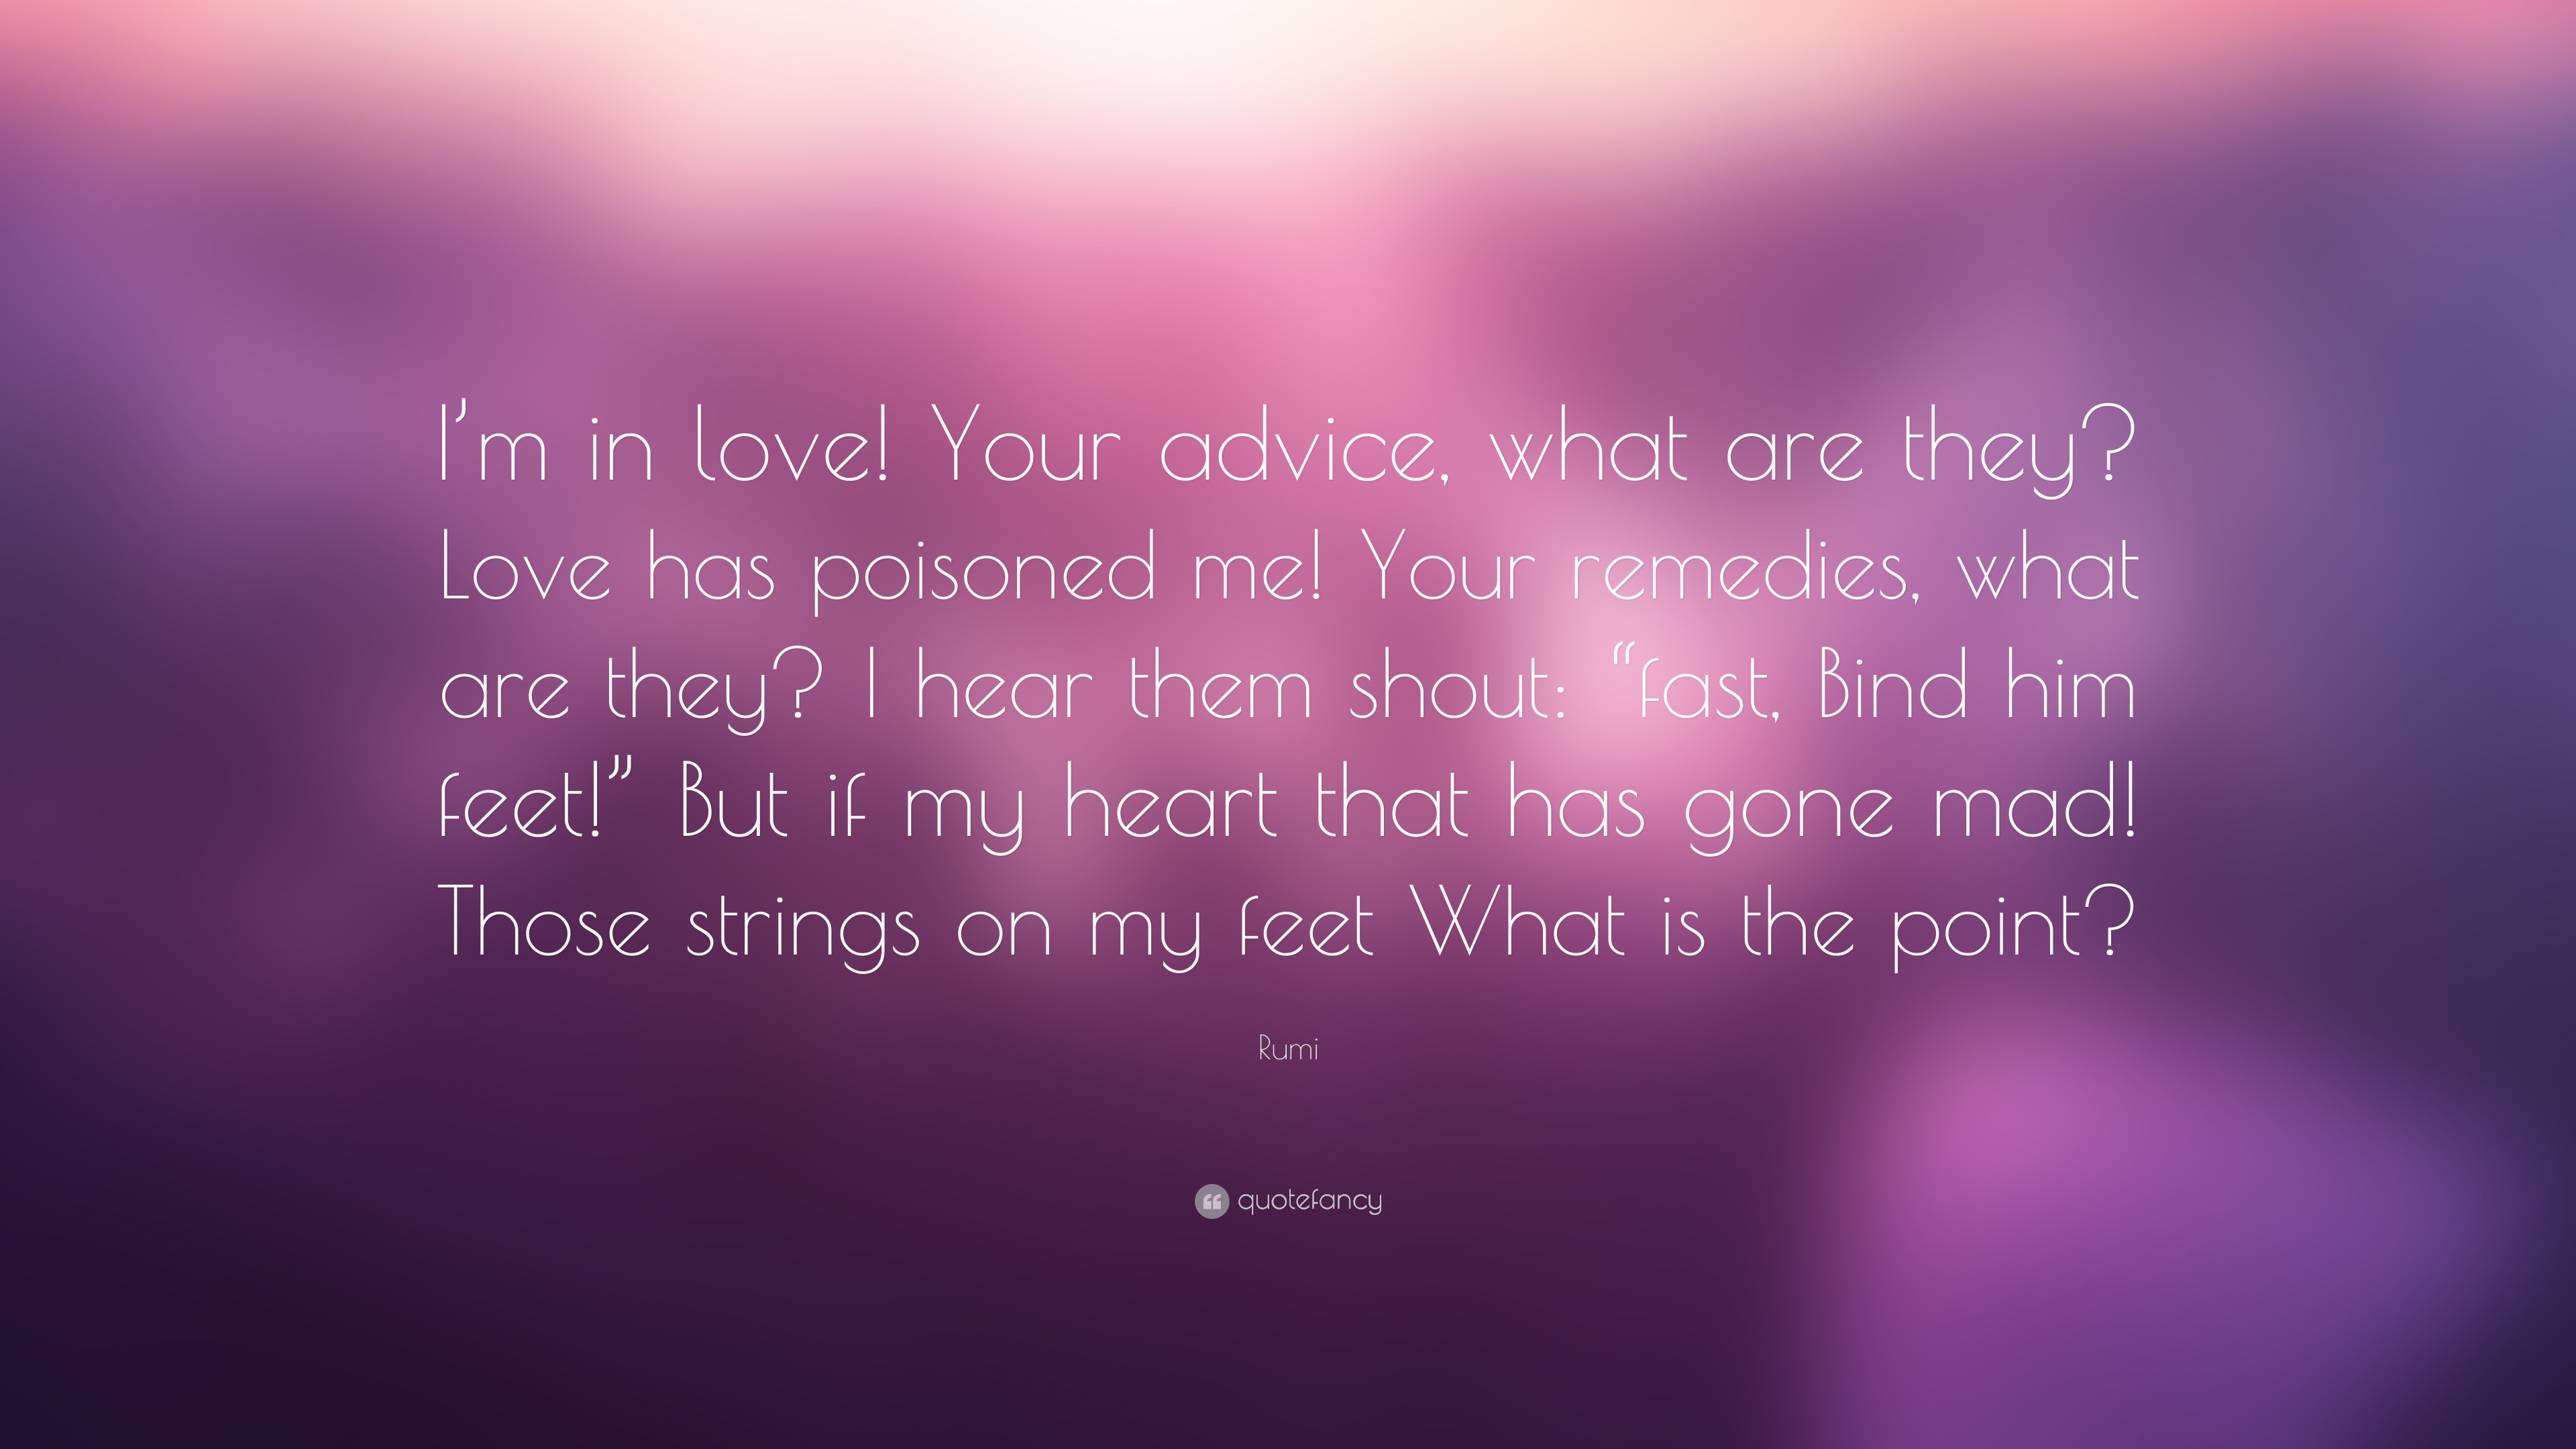 Rumi Quote: “I'm in love! Your advice, what are they? Love has poisoned me!  Your remedies, what are they? I hear them shout: “fast, B...”